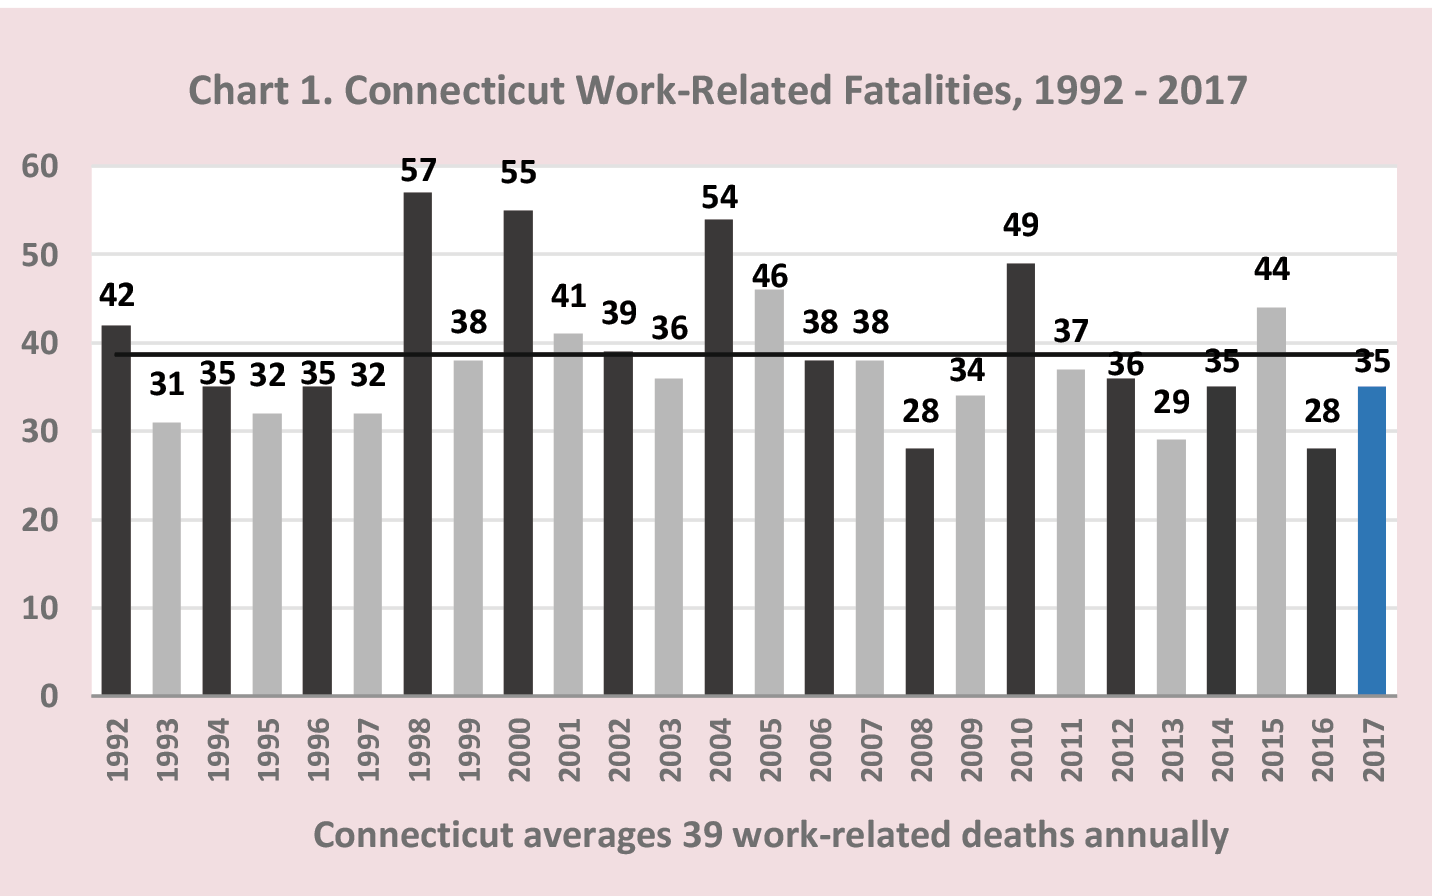 Chart 1. Connecticut Work-Related Fatalities, 1992-2017